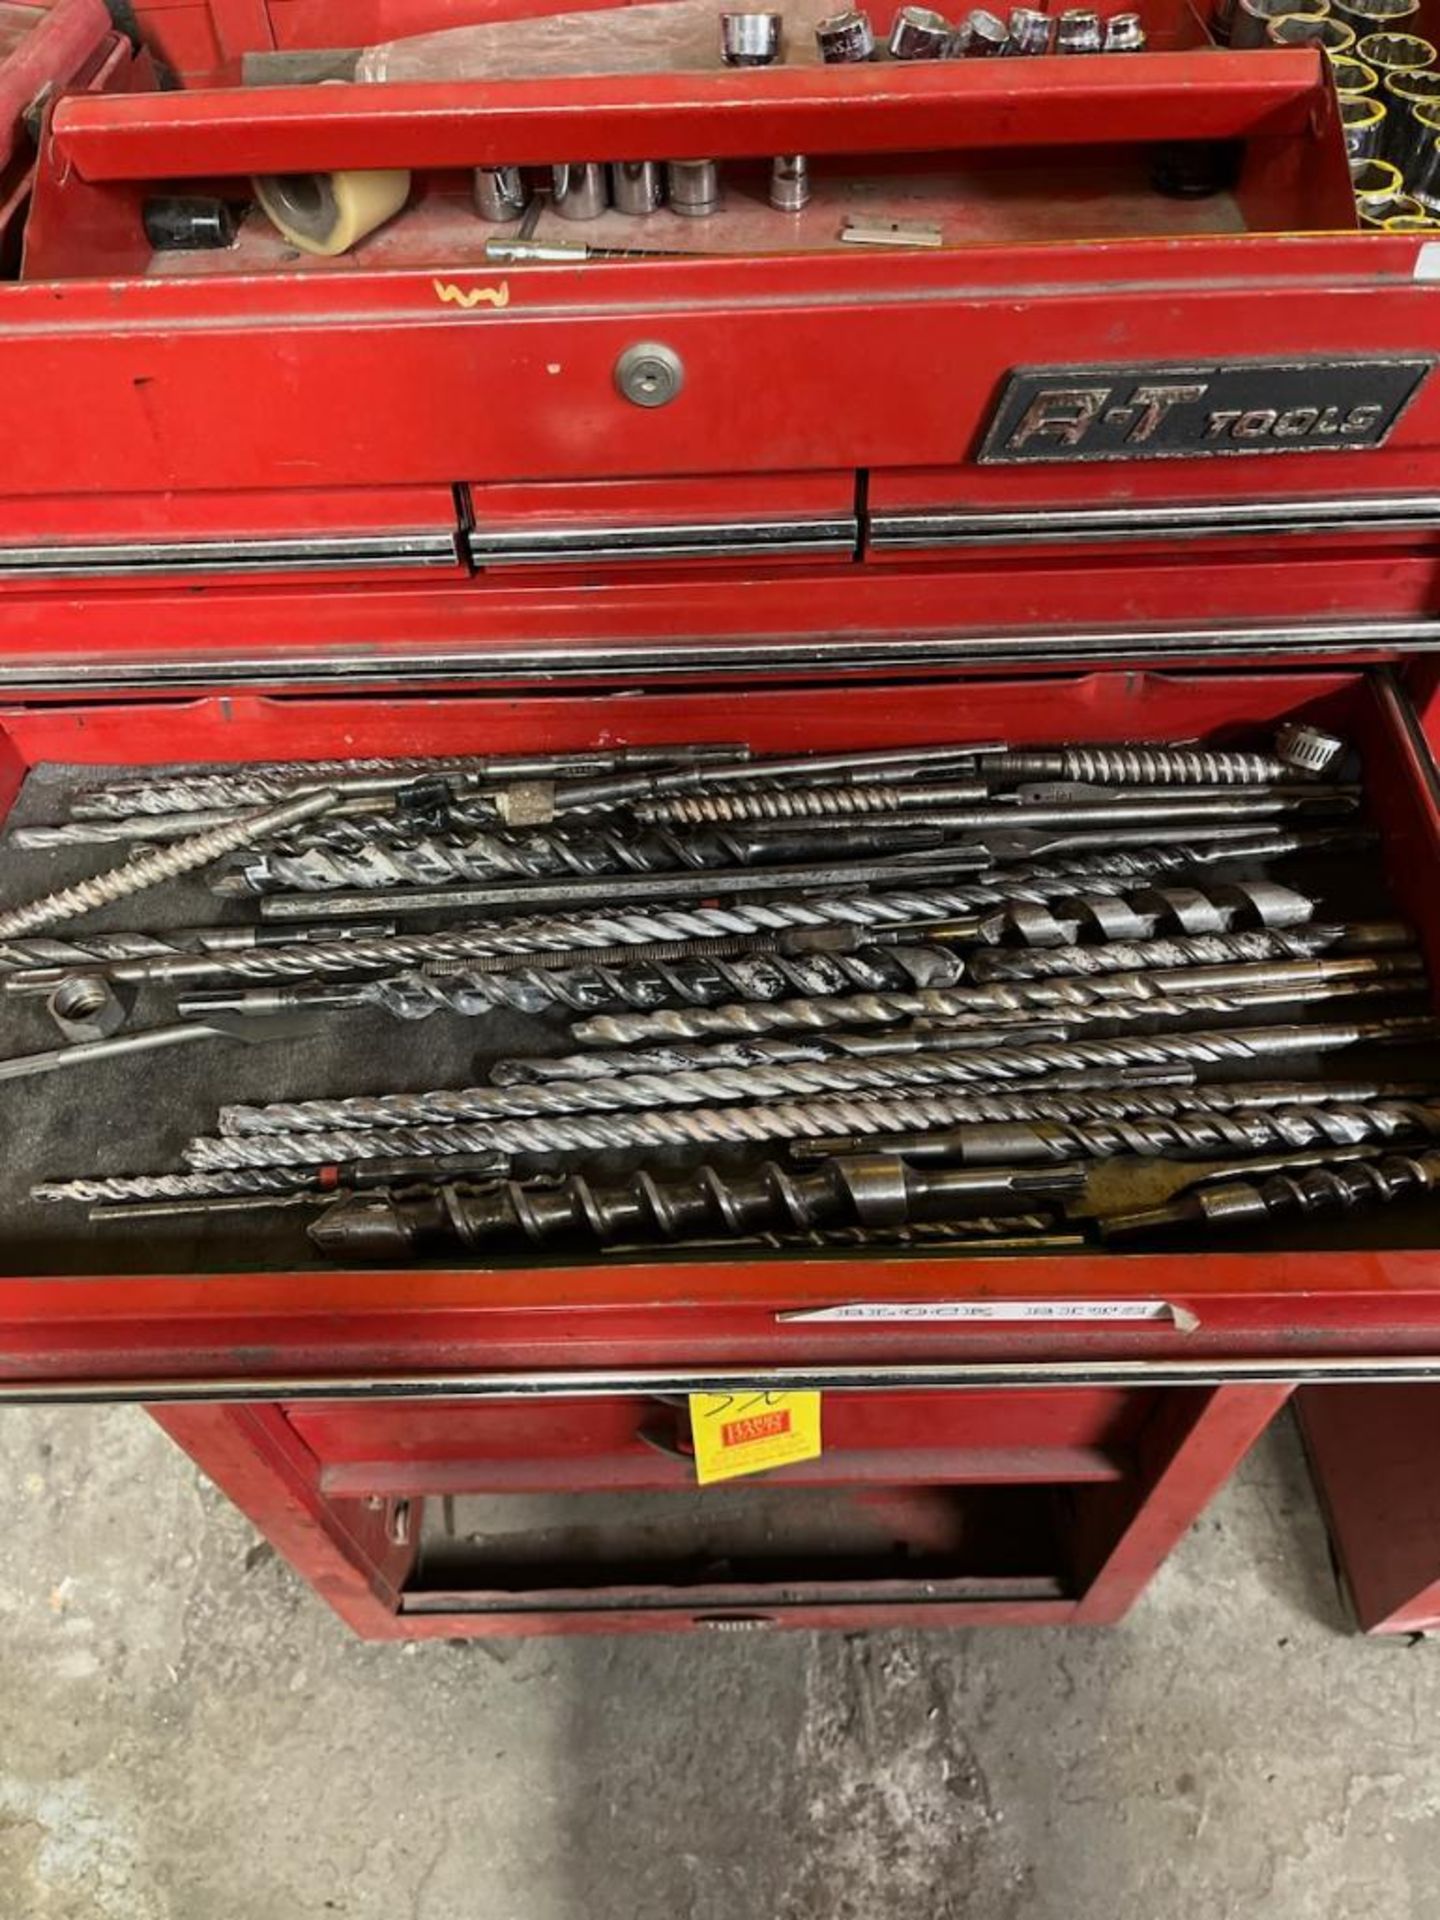 A-T Tools Mobile Tool Chest, Including: Ratchet Sets, Wrenches, Drill Bits, Files and Rasps - Image 5 of 11